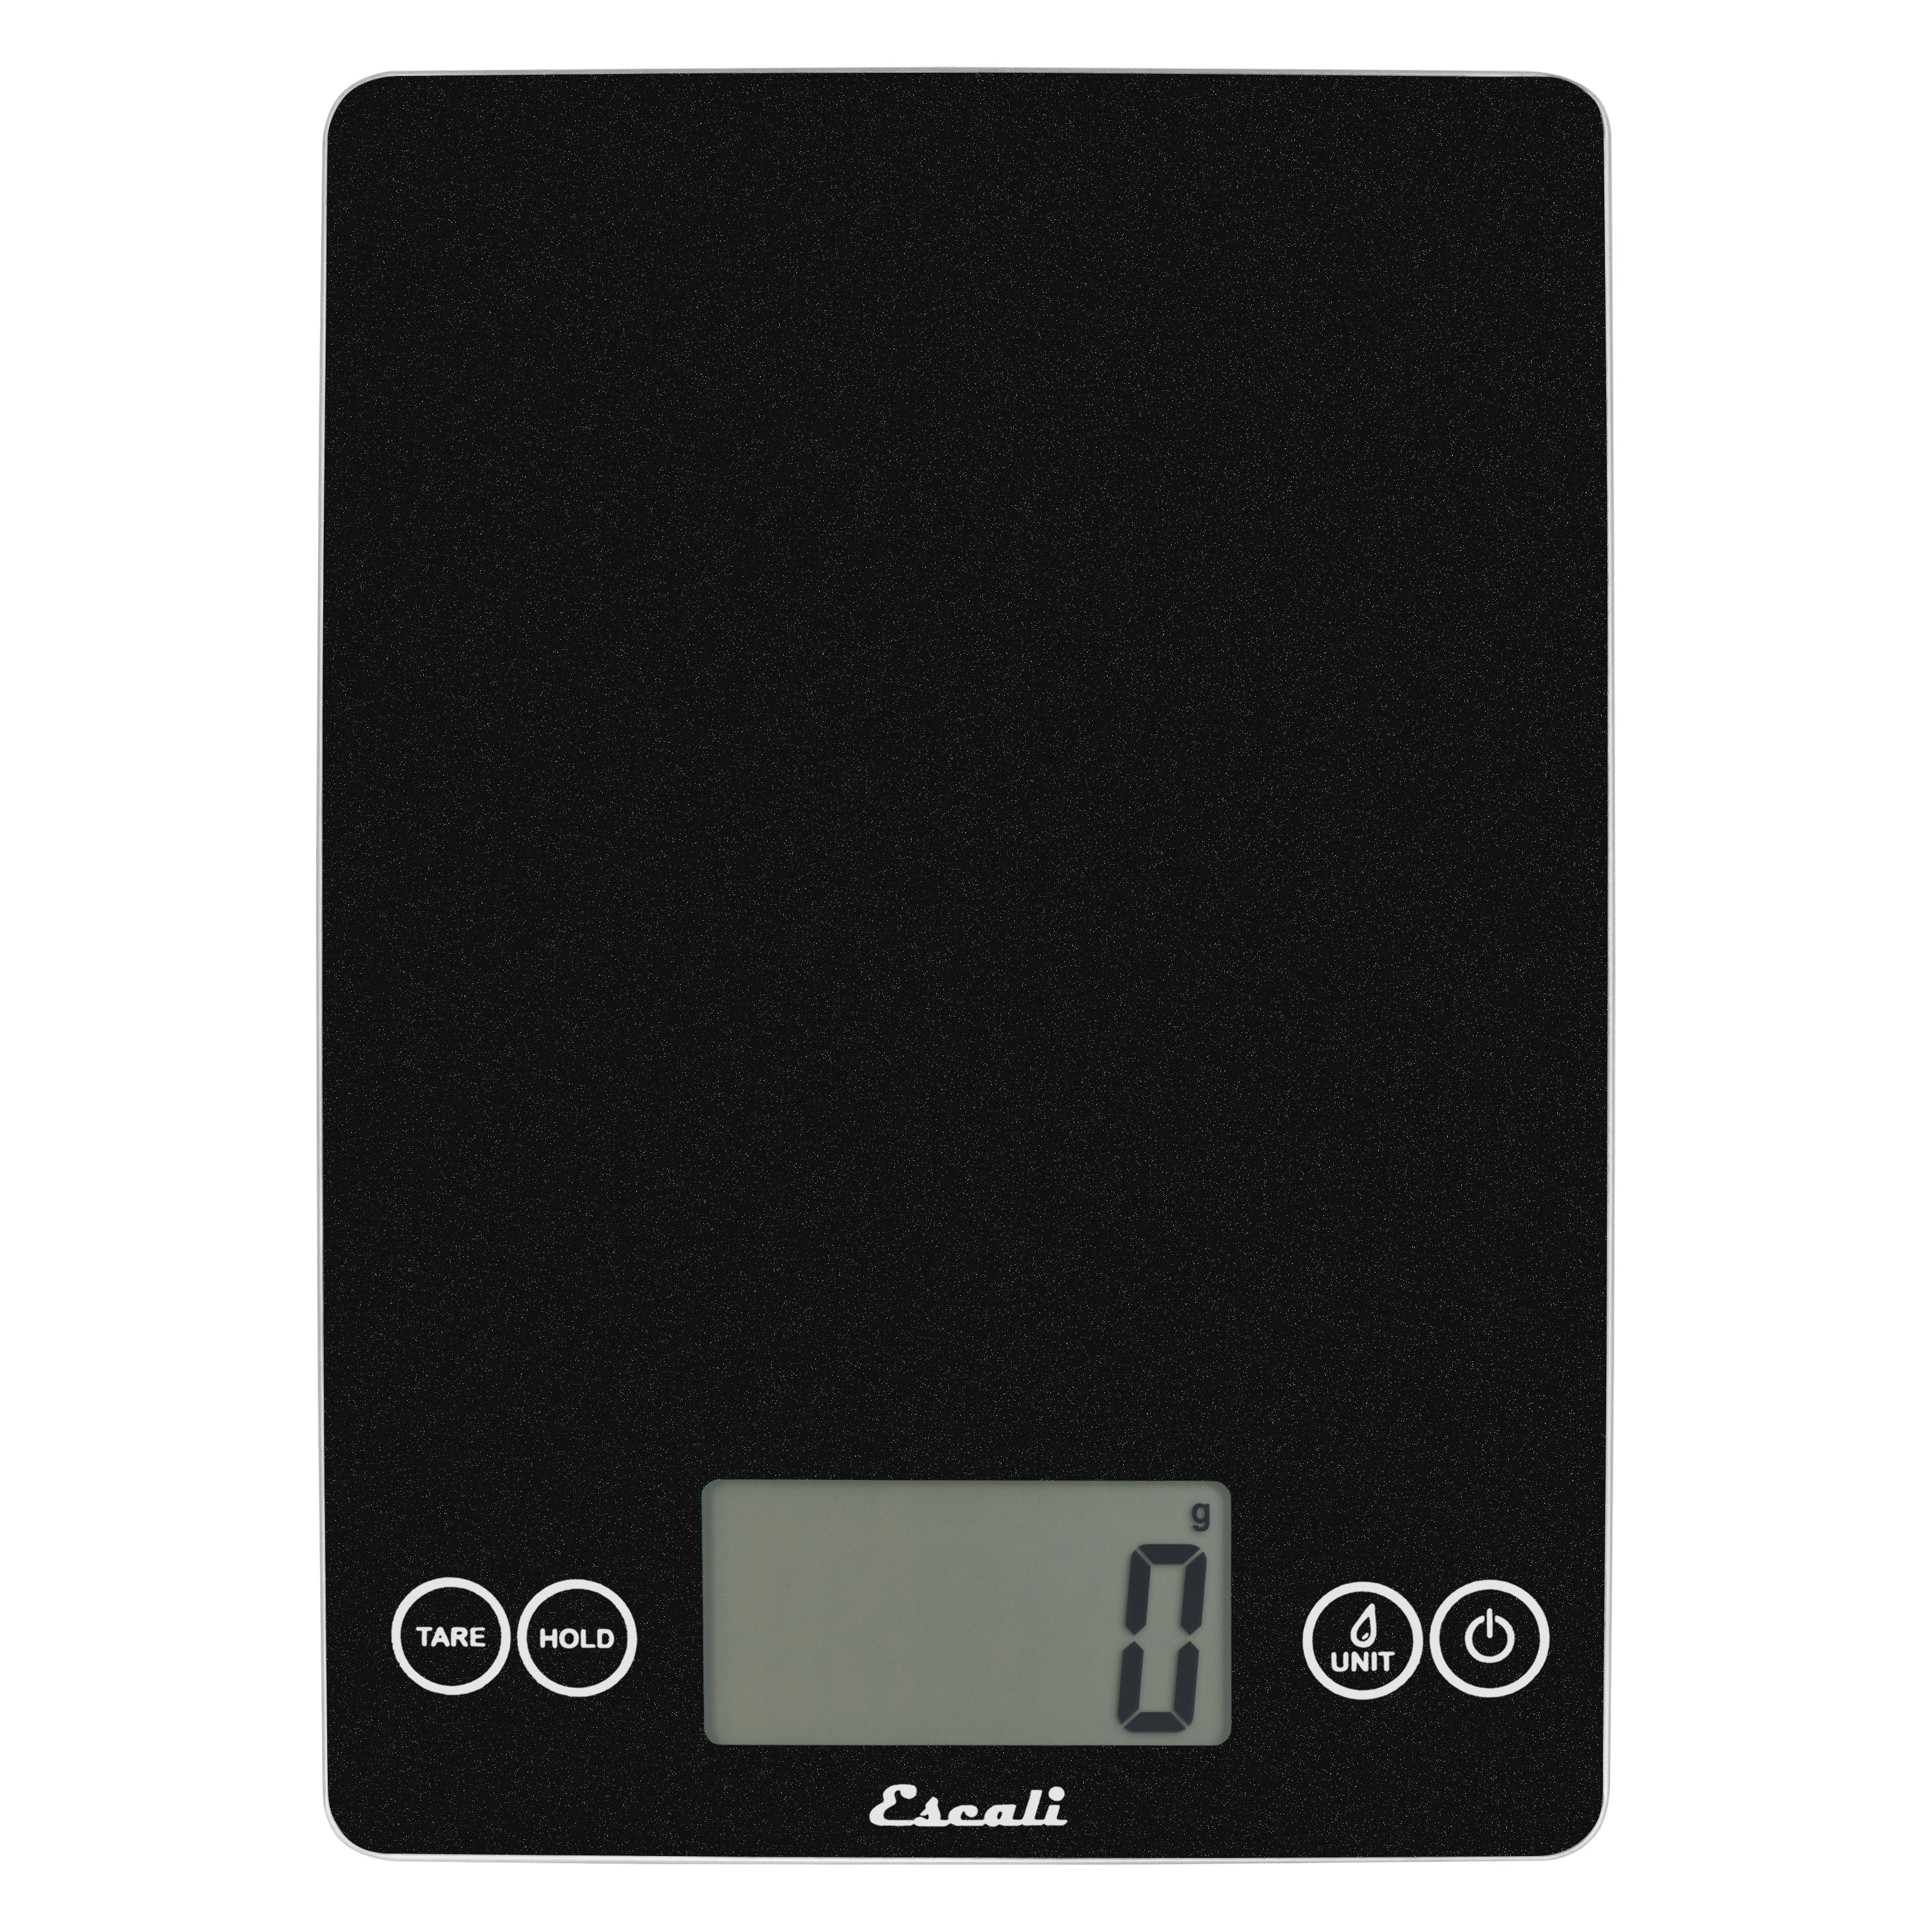 A photo of a black obsidian color ARTI Digital Kitchen Scale on a white background.